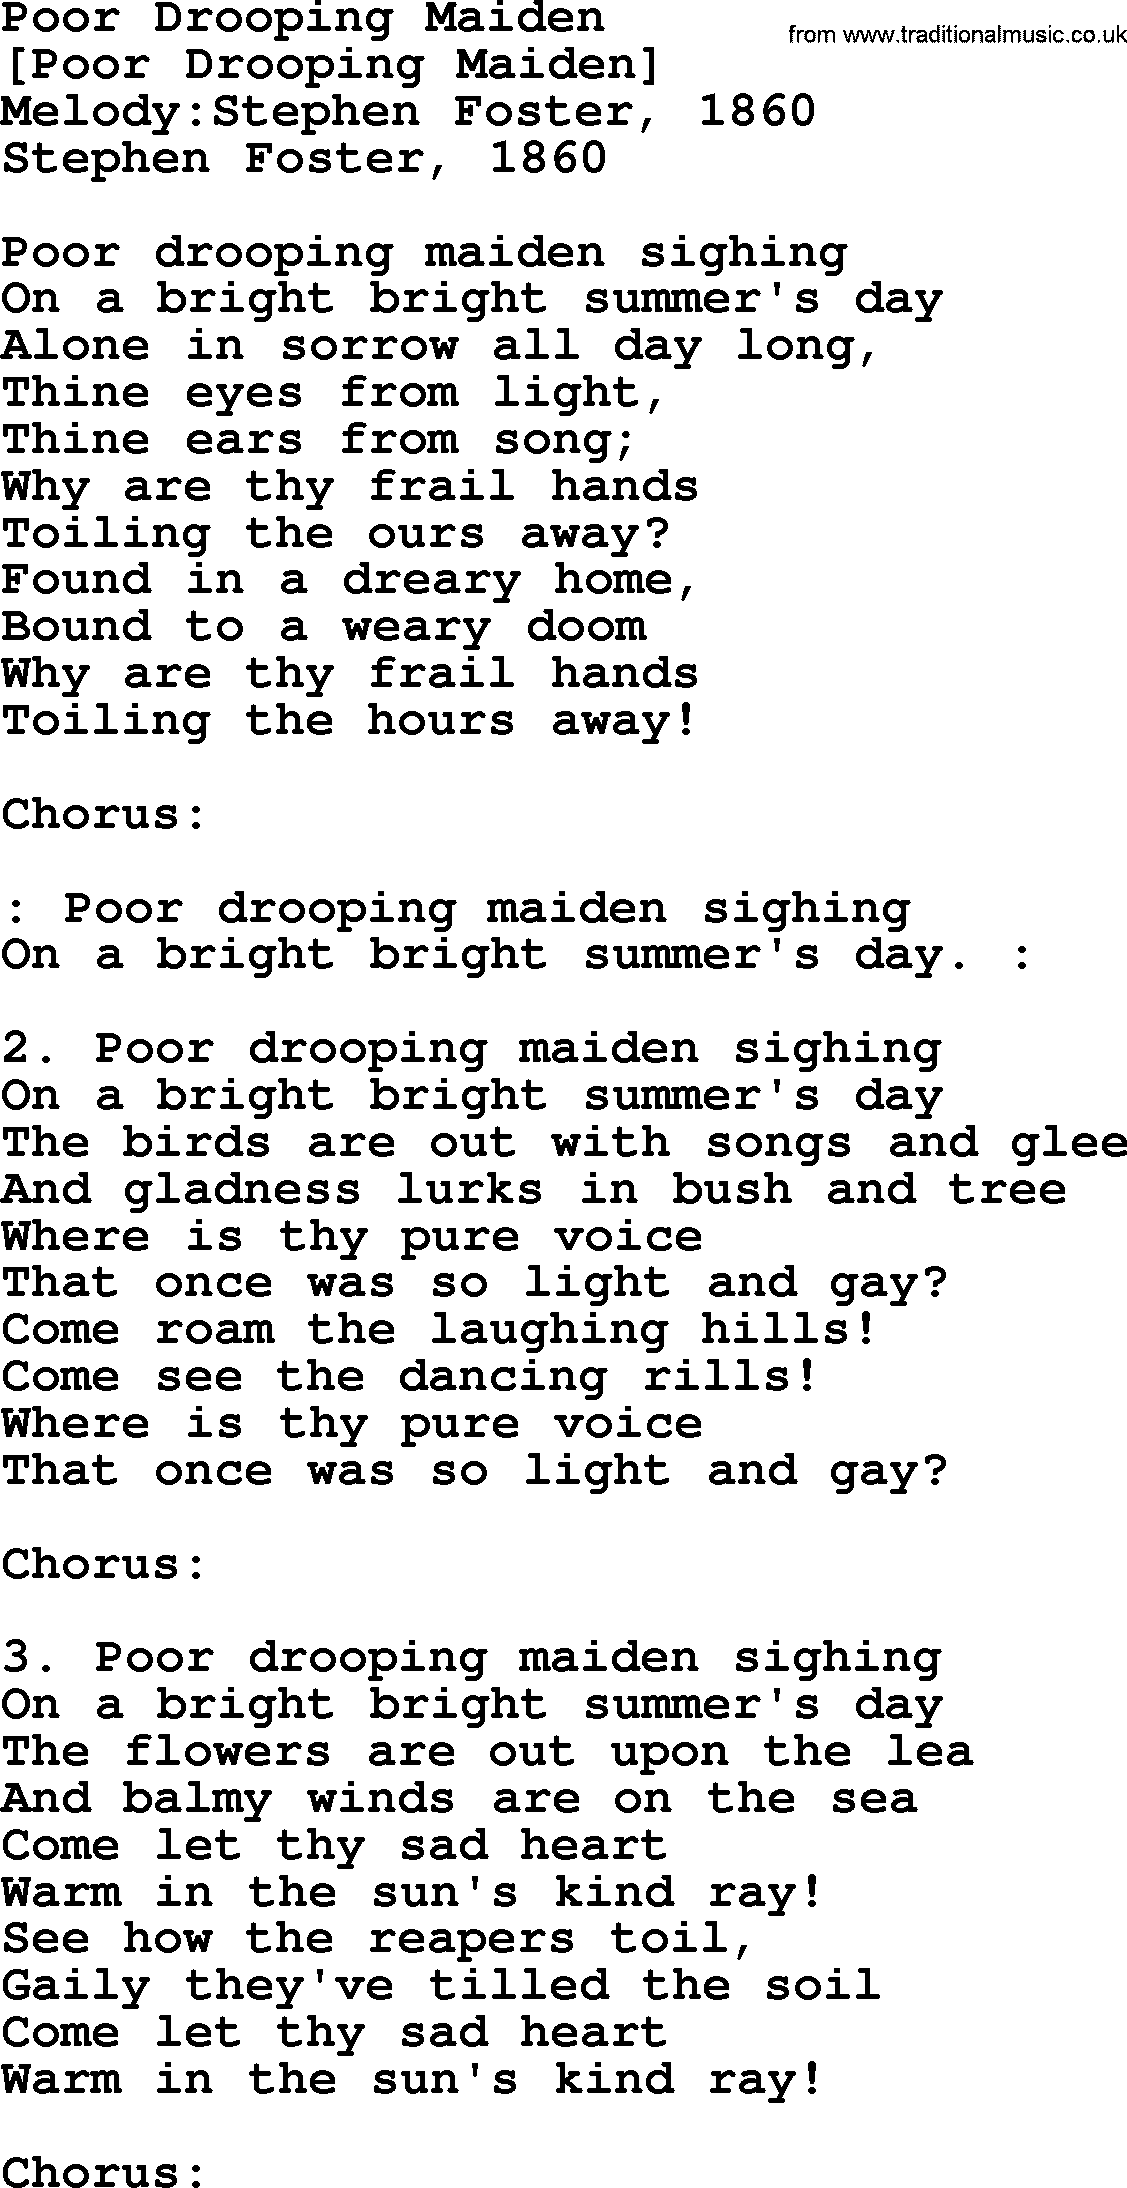 Old American Song: Poor Drooping Maiden, lyrics